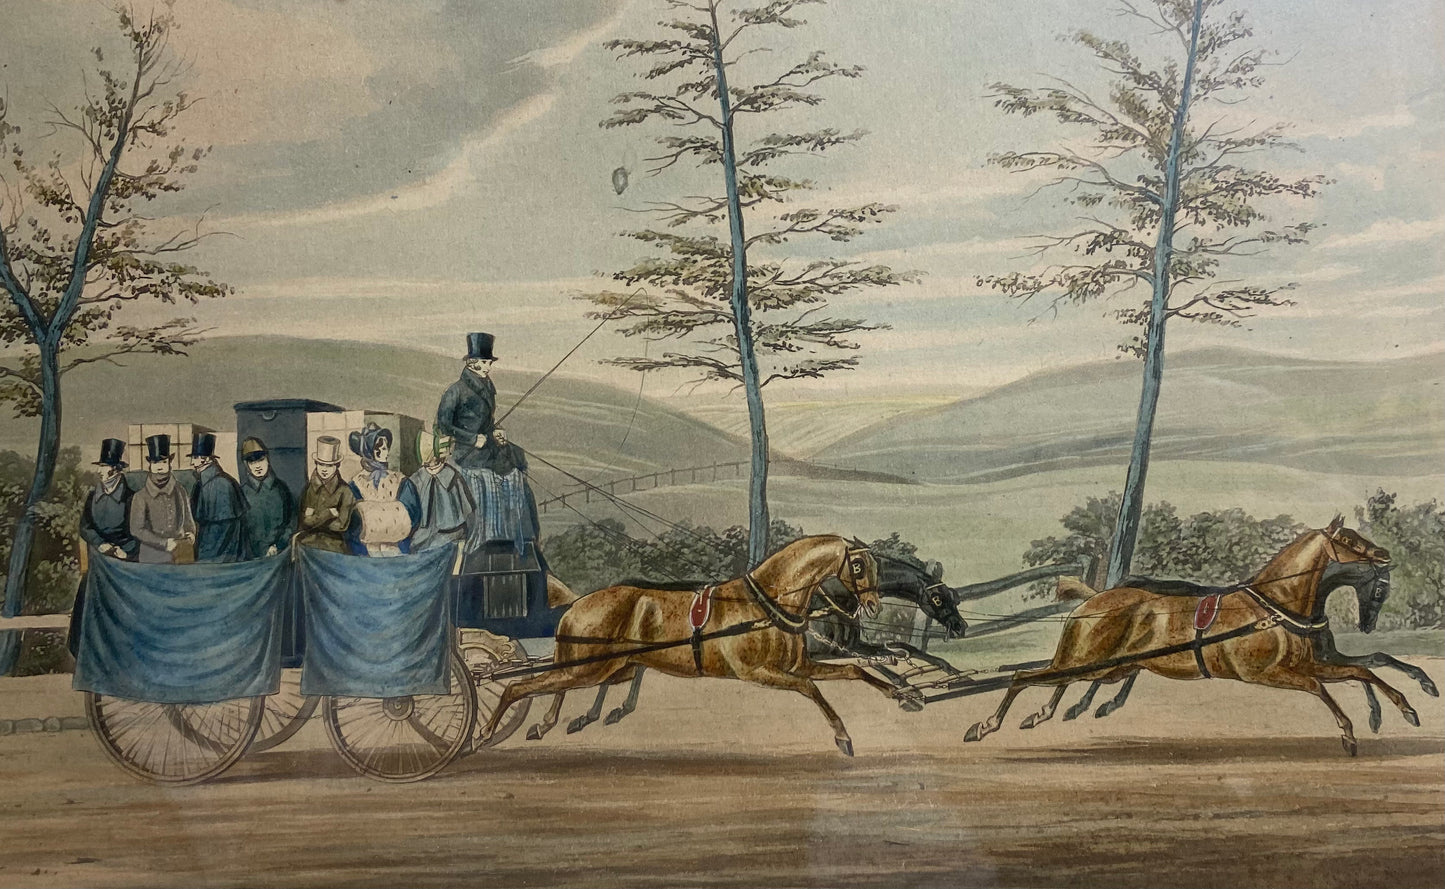 On The Road at Full Pace Car Travelling in the South of Ireland in the Year 1856 - Engraving by John Harris The Younger